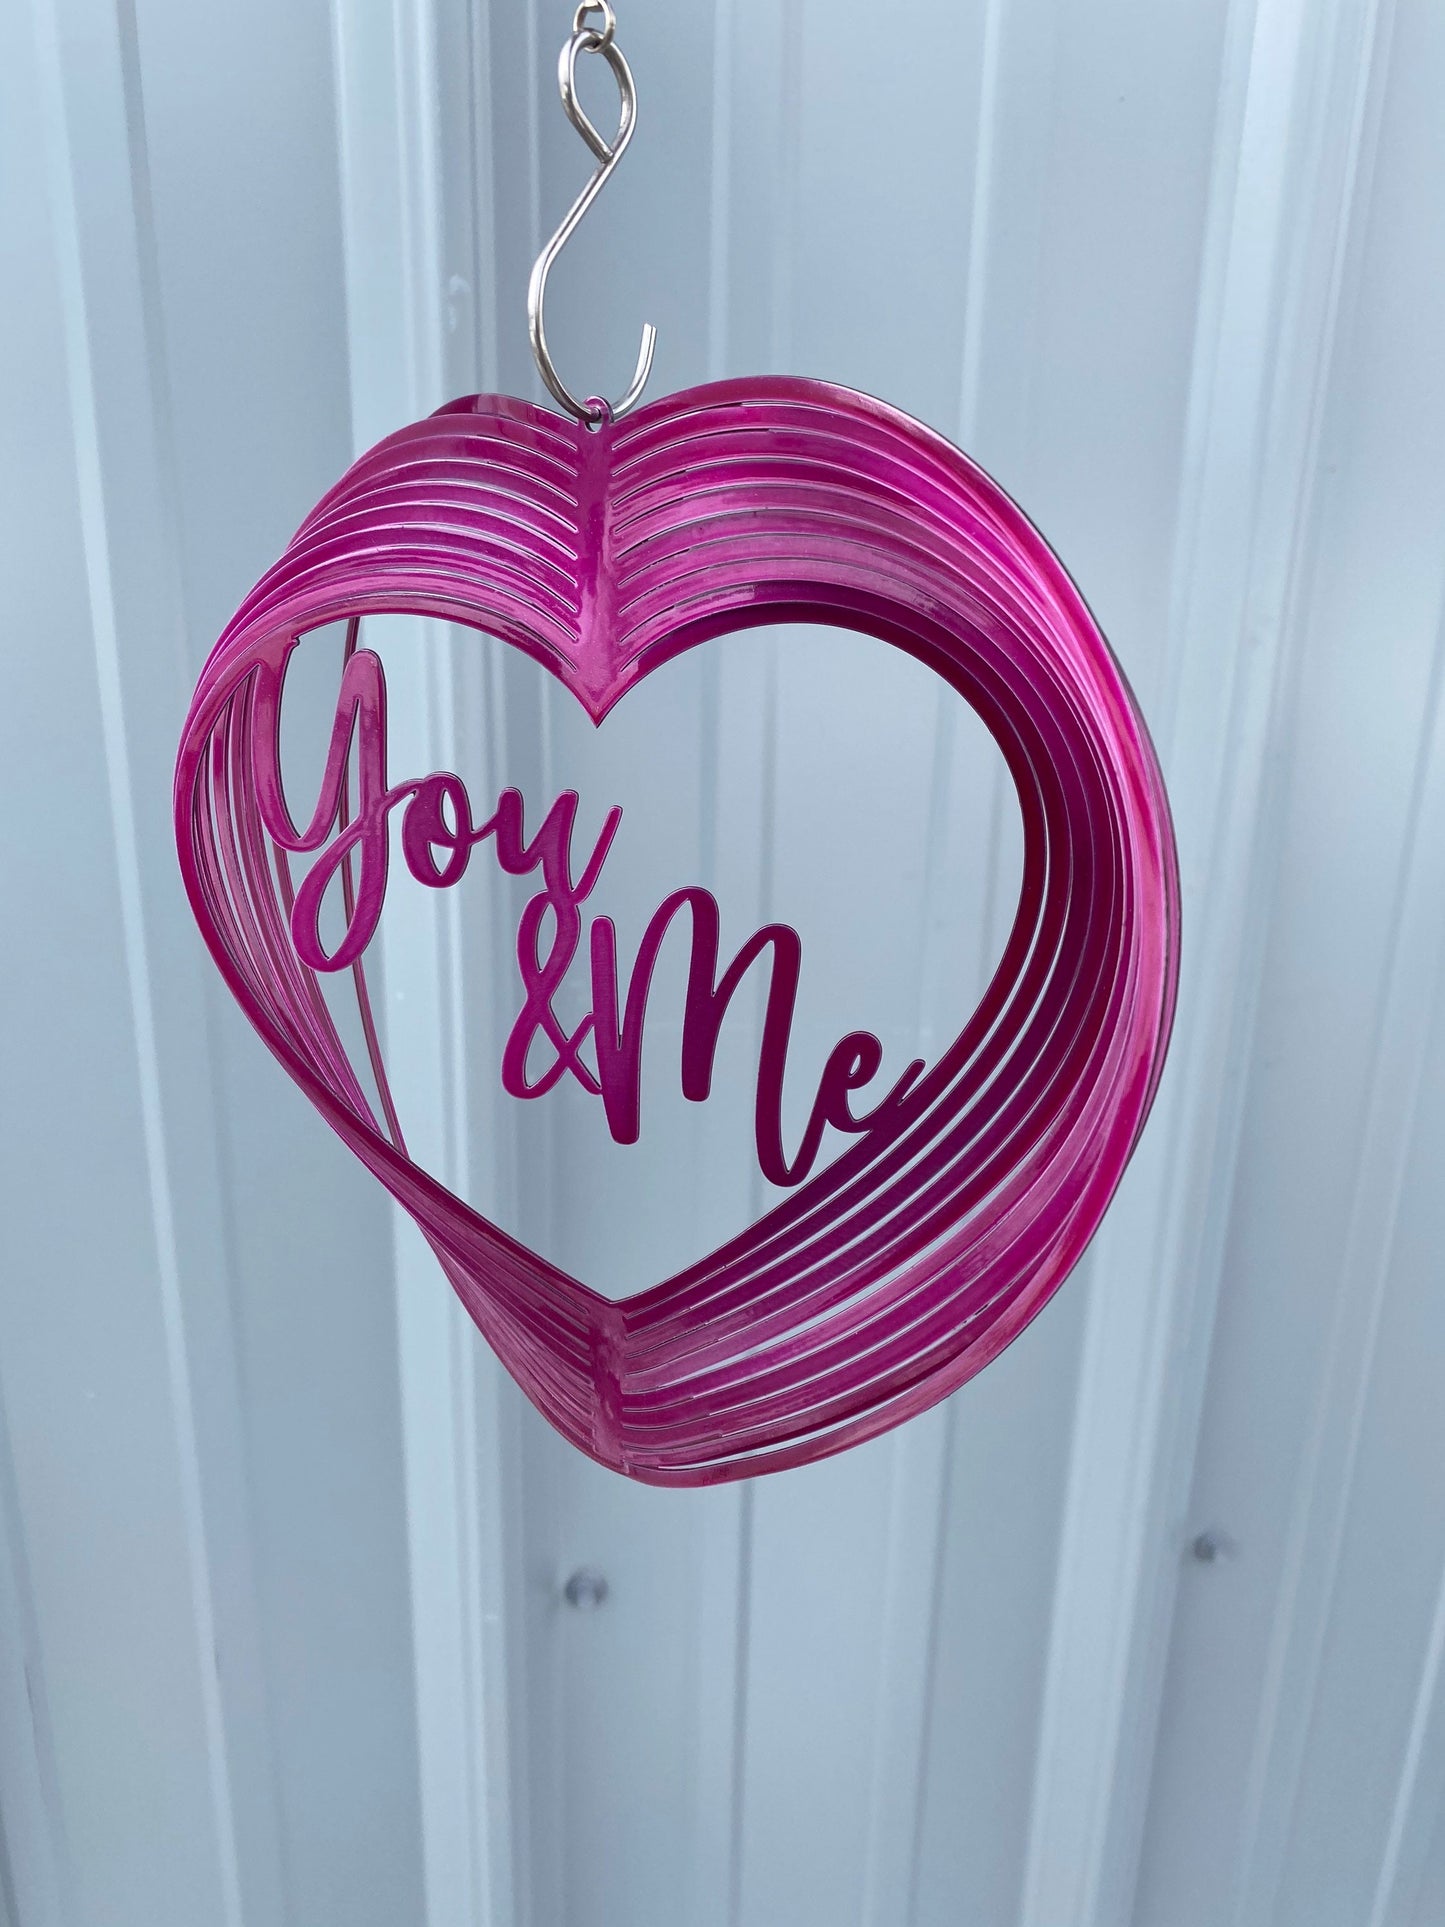 You and me heart wind spinner, love, Valentine’s Day Gift, Mothers Day gifts, garden decor,